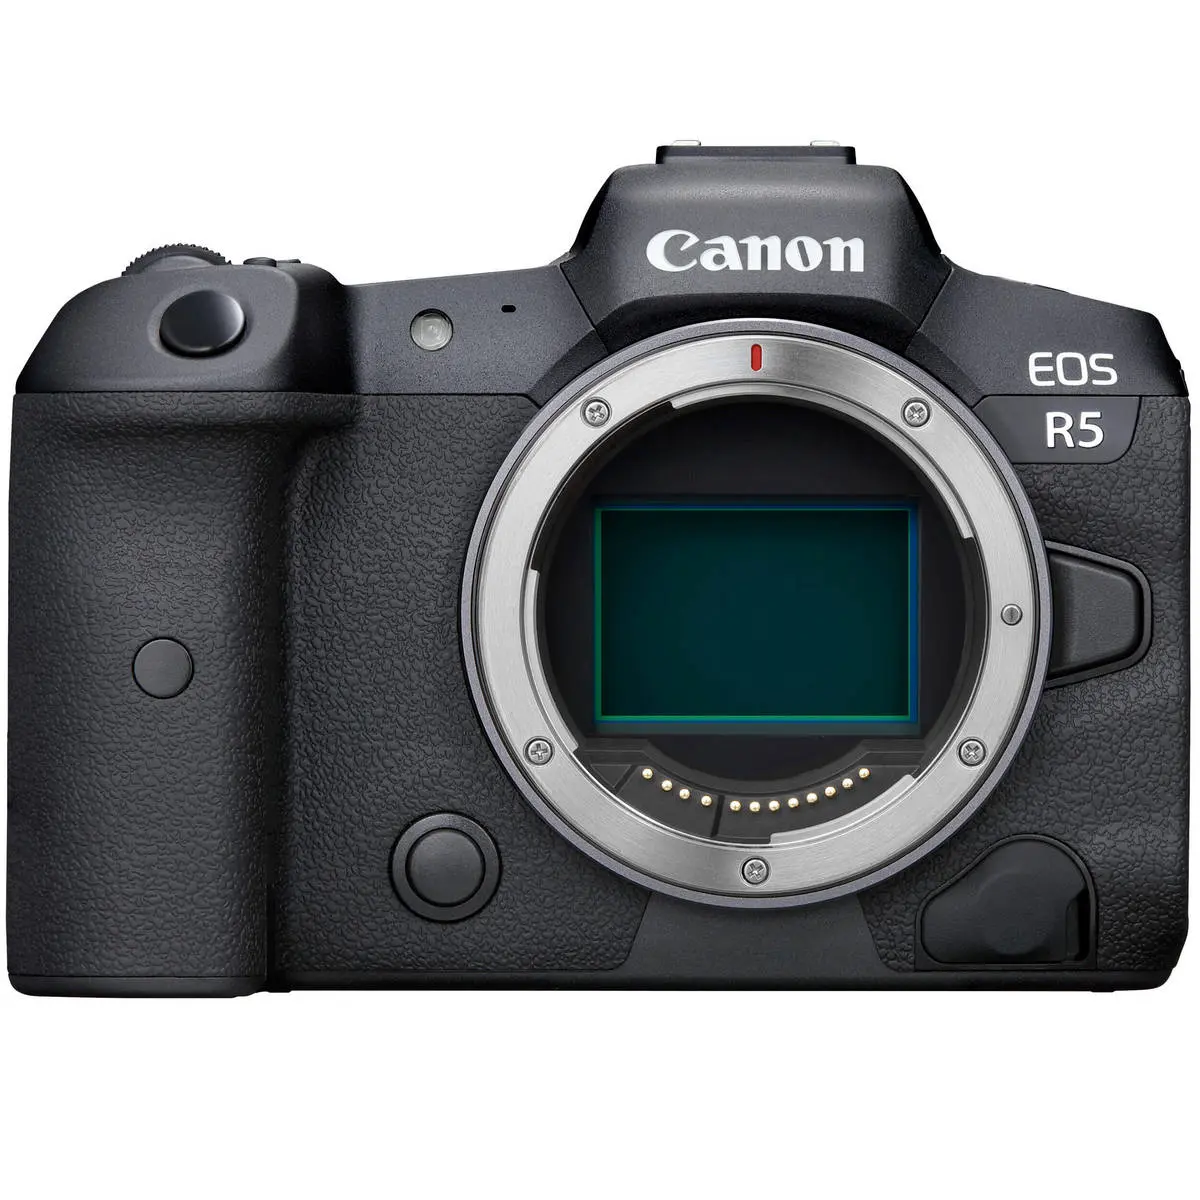 Main Image Canon EOS R5 Body (with adapter)